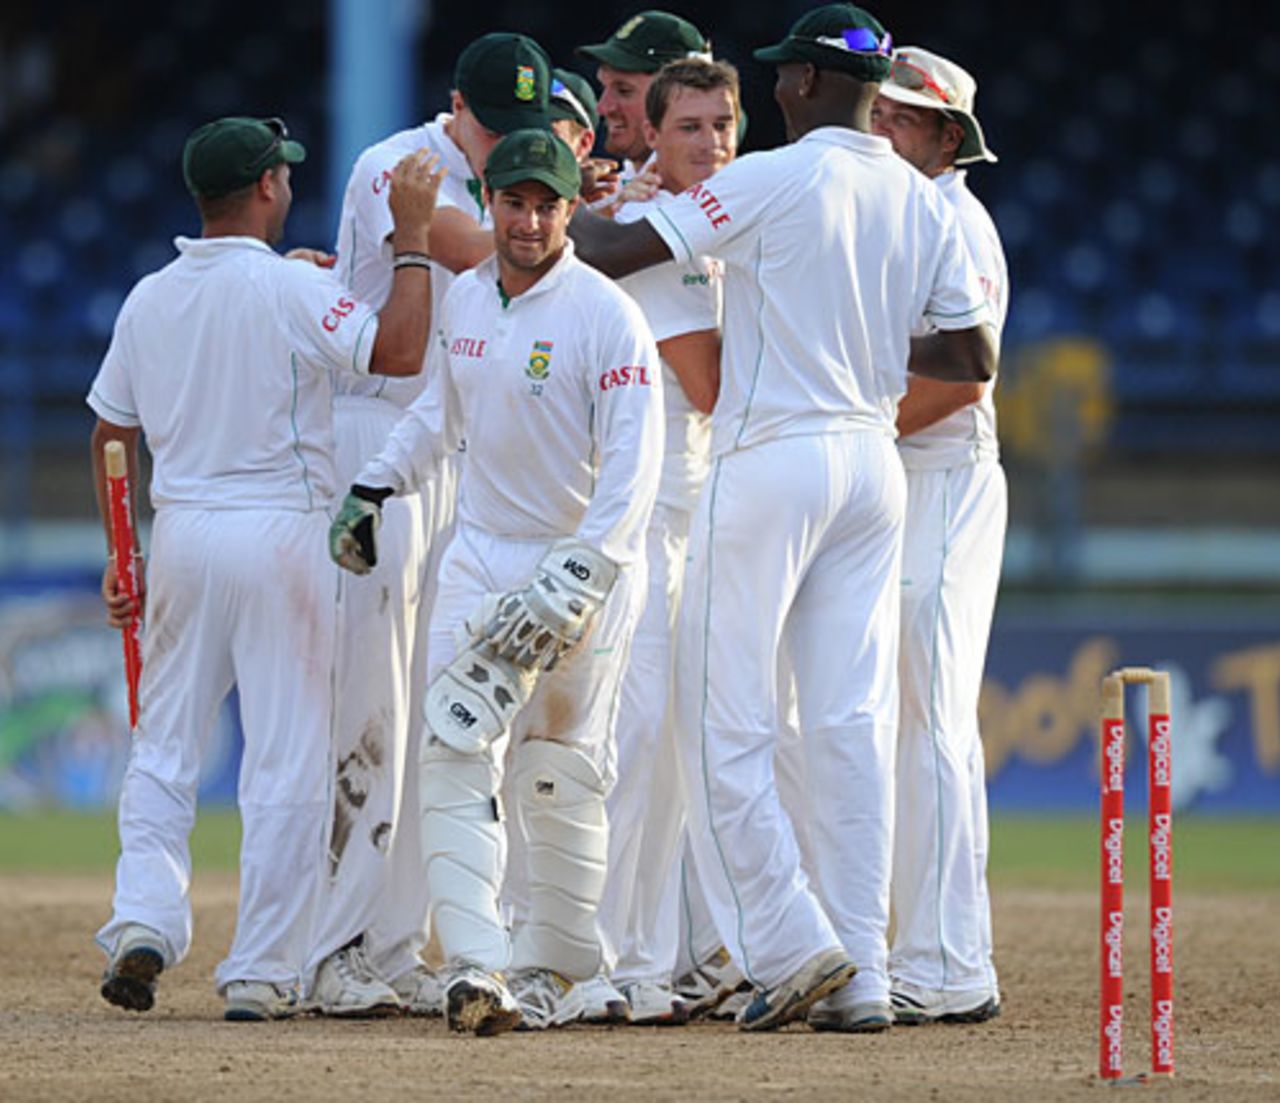 South Africa celebrate after completing a 163-run victory in the first Test, West Indies v South Africa, 1st Test, Trinidad, 4th day, June 13, 2010